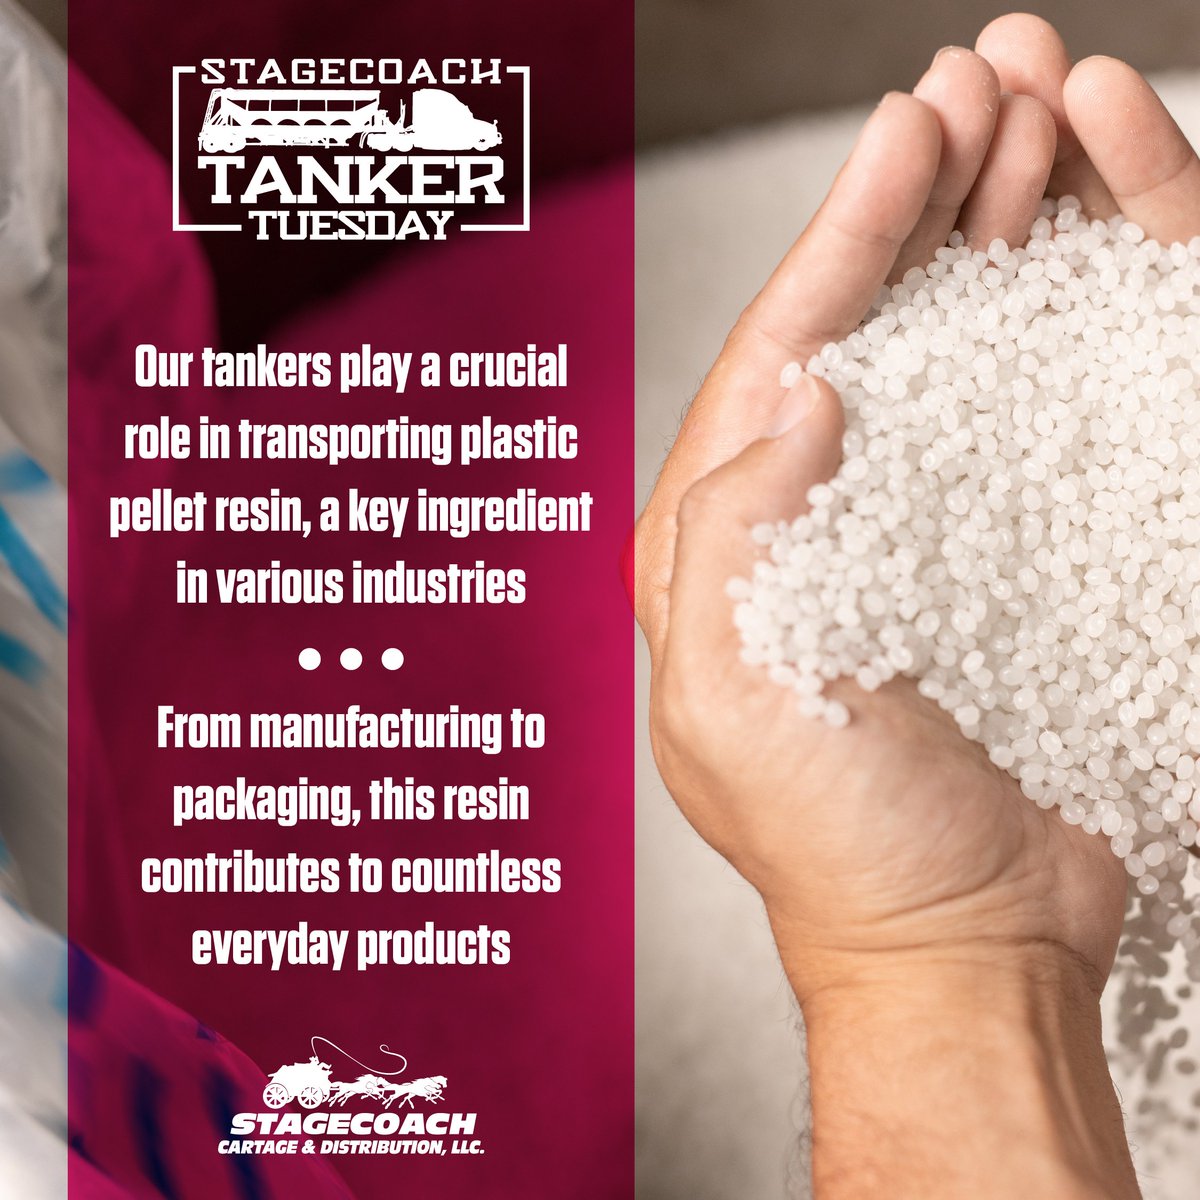 🌟 We take pride in the role our tankers play in transporting plastic pellet resin. 😎
These vessels are the lifeline of various industries, enabling the production of everyday products. 🛢️
#Stagecoach #drive4stagecoach #TankerTuesday #Tanker #Division #PlasticResin #Logistics